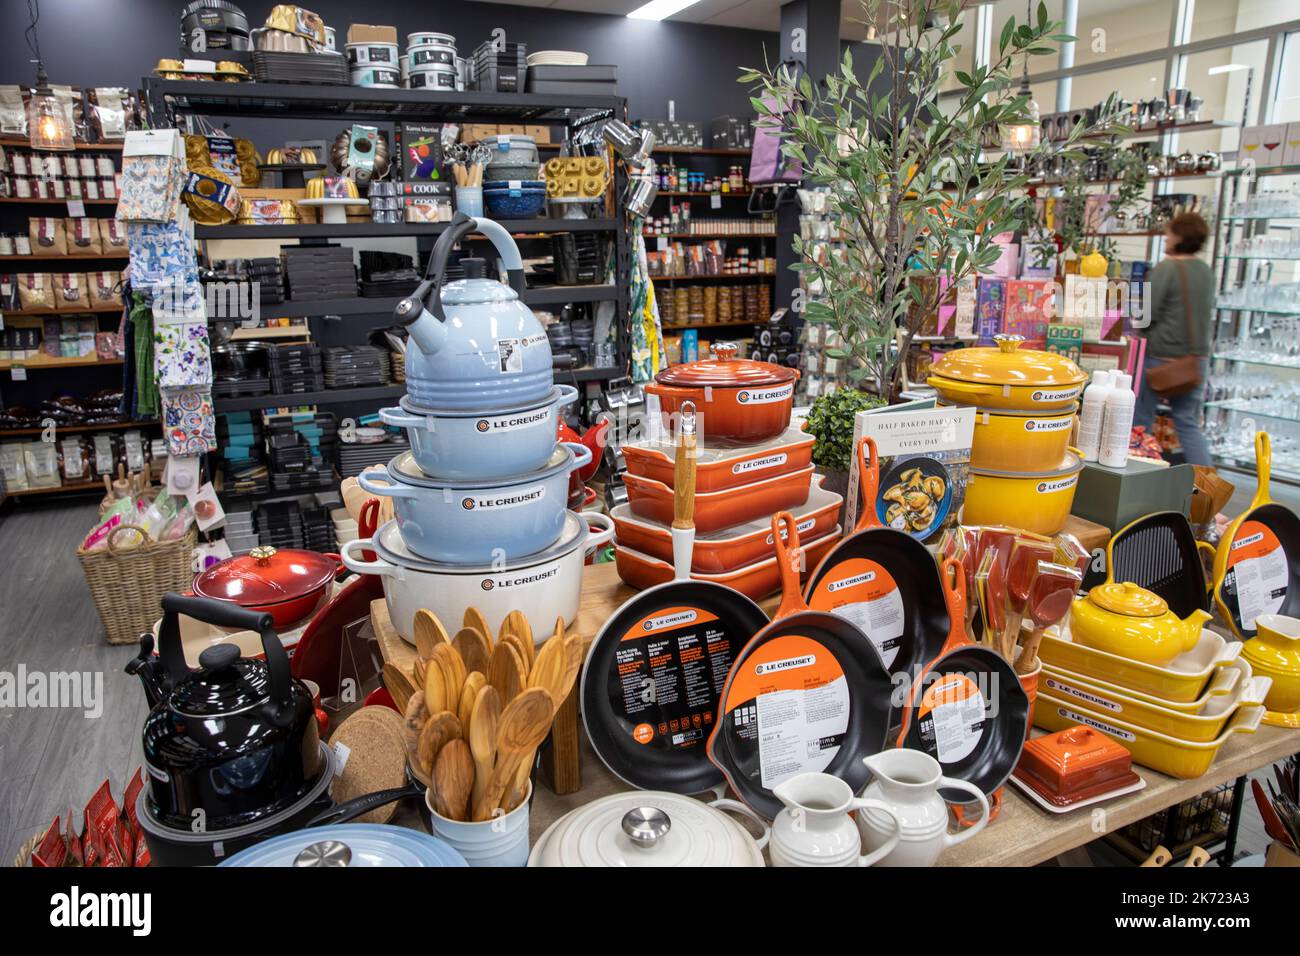 Kitchen ware shop in Orange New South Wales selling Le Creuset kitchen cookware pots and pans and casserole pots,NSW,Australia Stock Photo